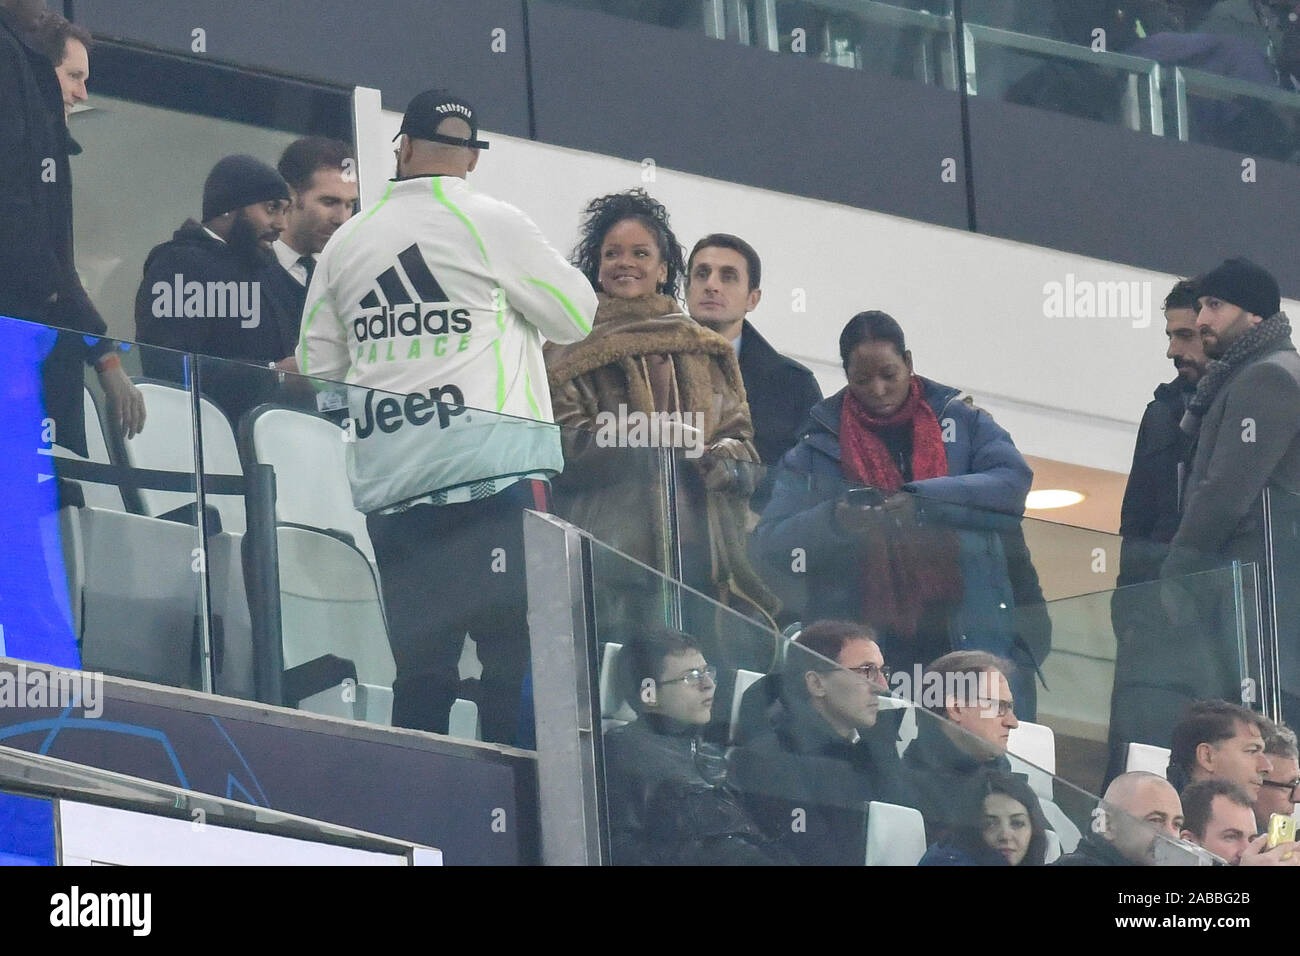 Turin, Italy. 26th Nov, 2019. Rihanna at the Allianz Stadium to see Juventus - Atletico Madrid In the Photo: Robyn Rihanna Fenty Credit: Independent Photo Agency/Alamy Live News Stock Photo